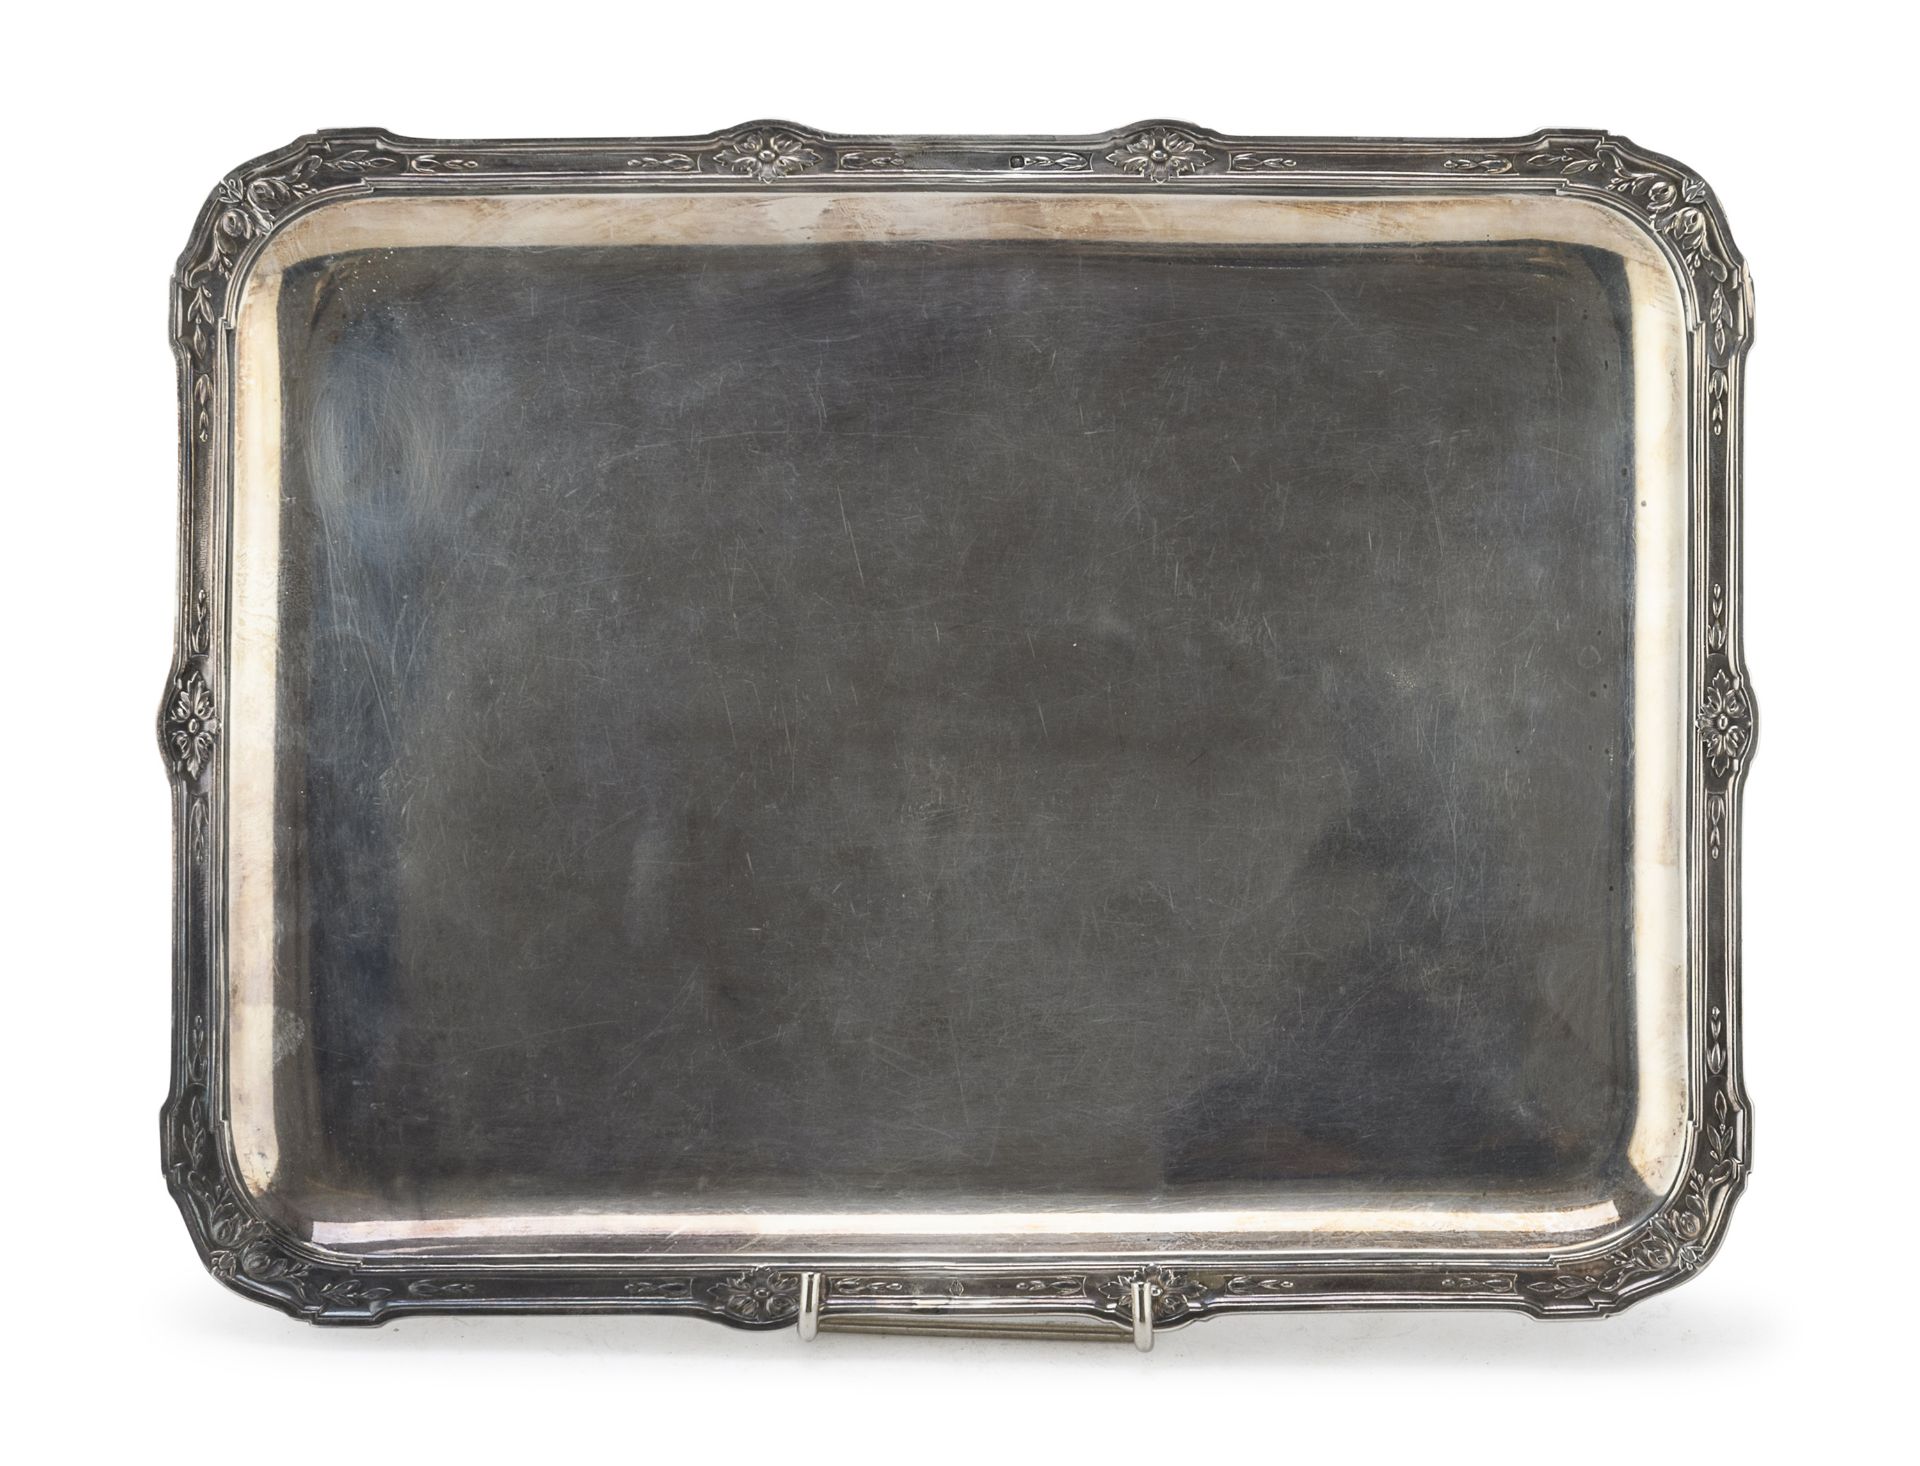 SILVER TRAY FRANCE EARLY 20TH CENTURY